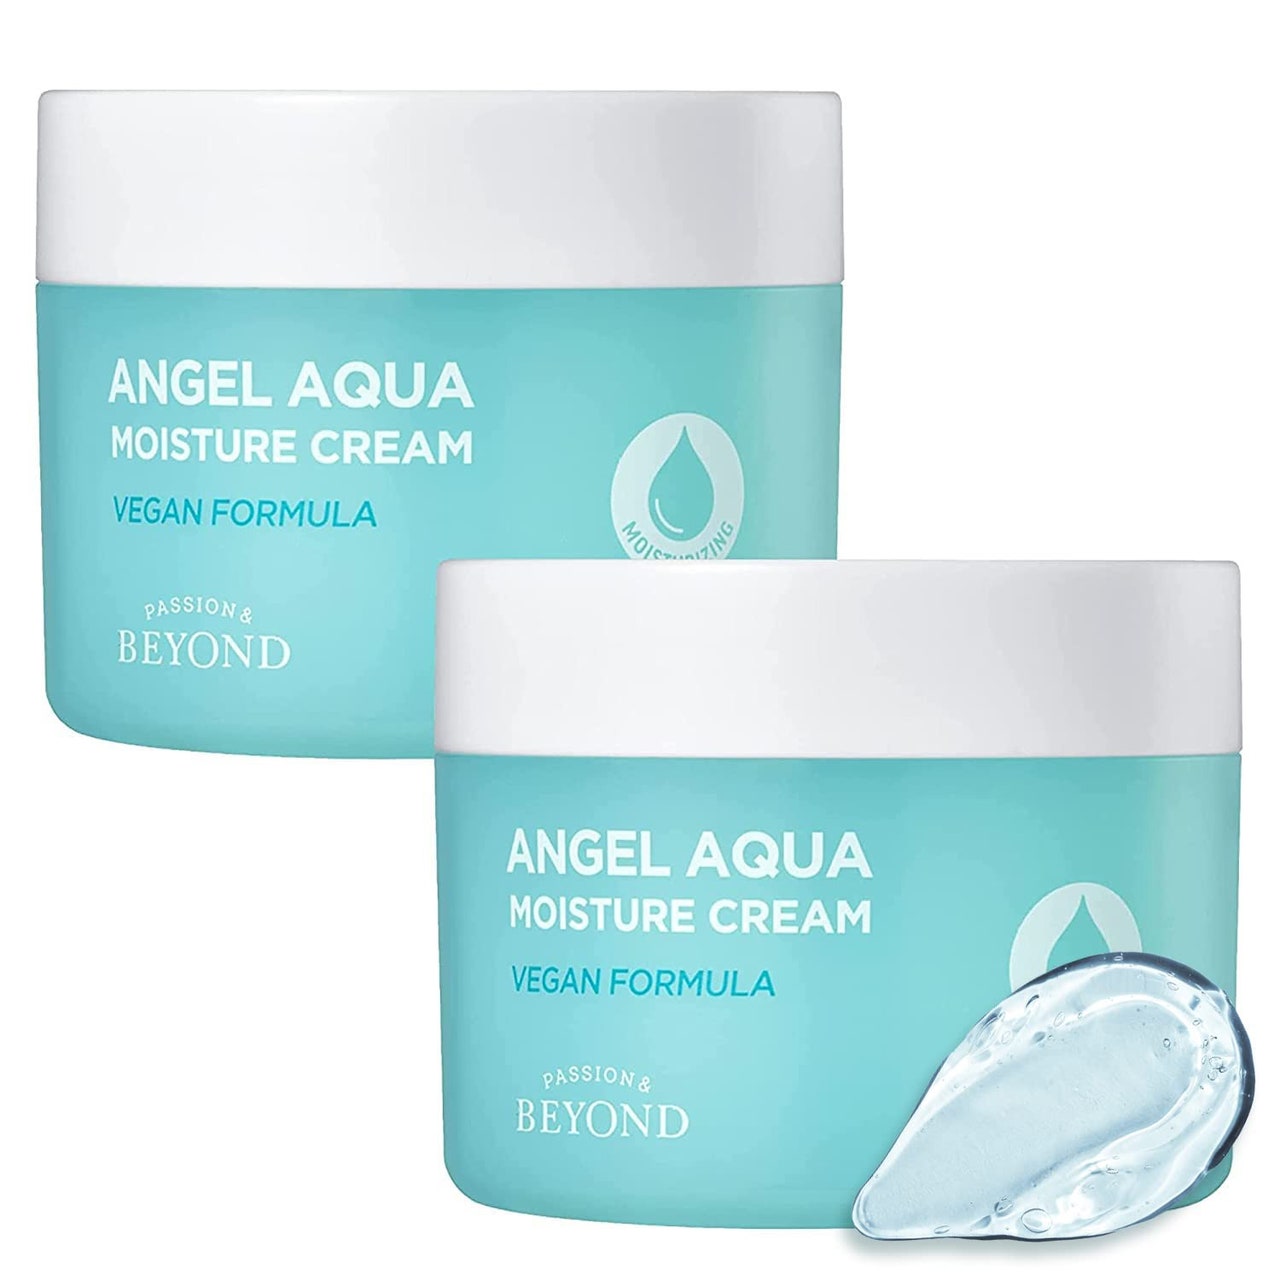 Beyond Angel Aqua Moisture Cream two turquoise jars with white lids on white background